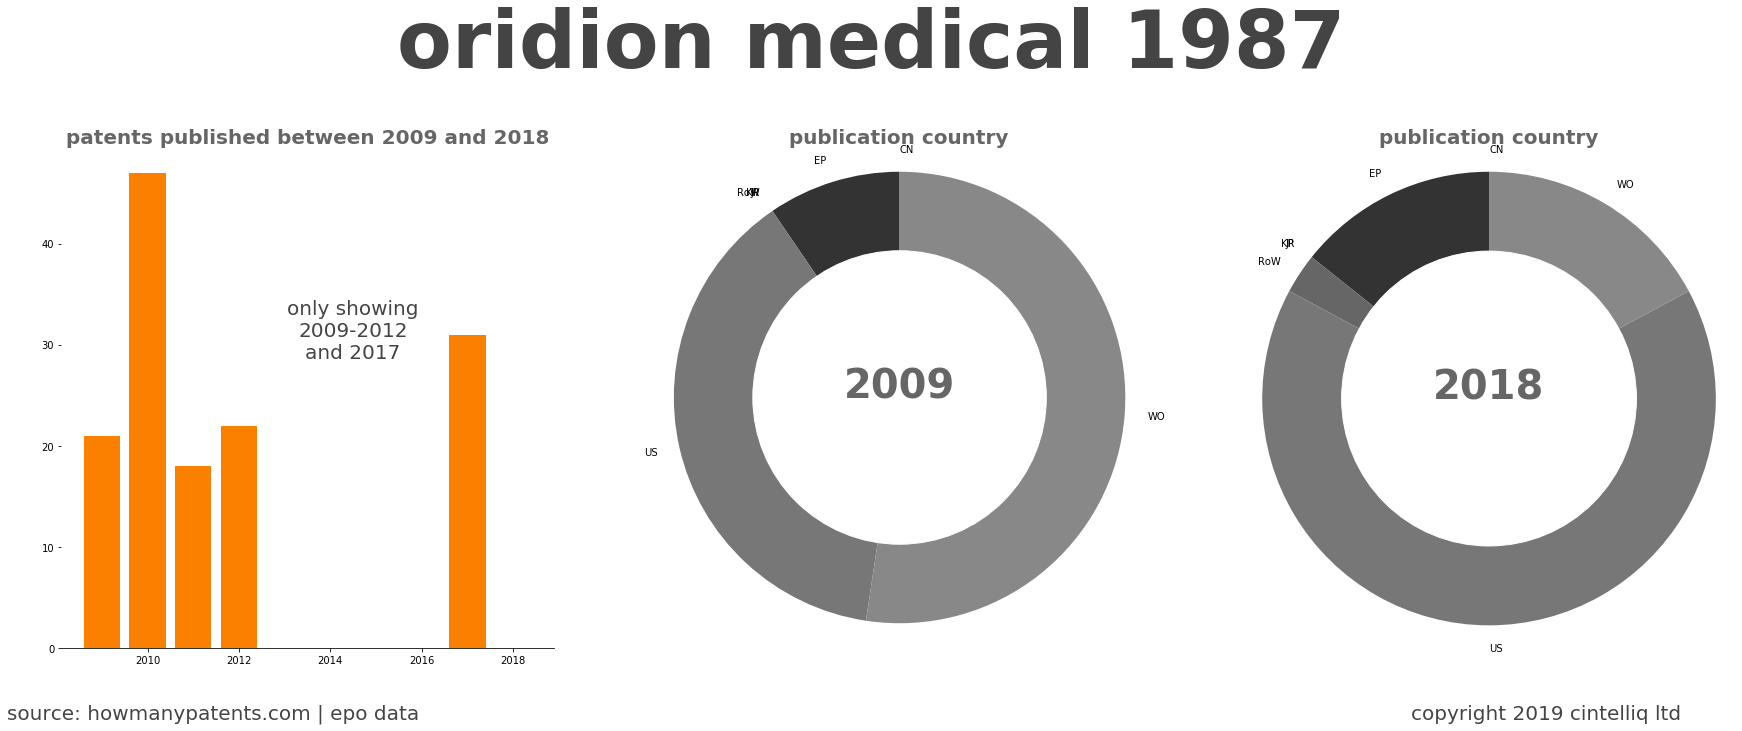 summary of patents for Oridion Medical 1987